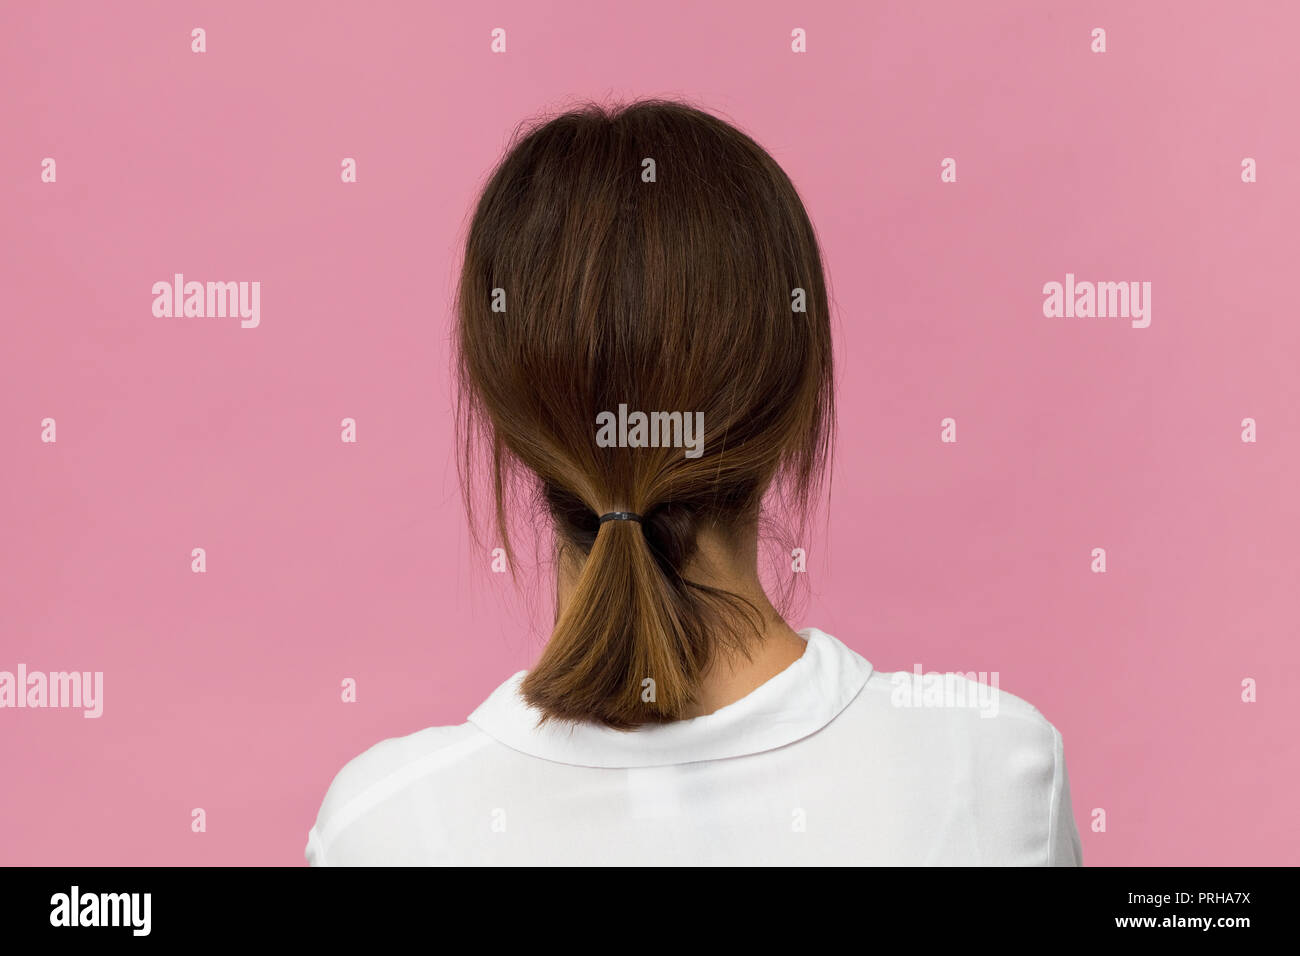 Back view of young woman with brown hair. She is waiting of someone Stock Photo